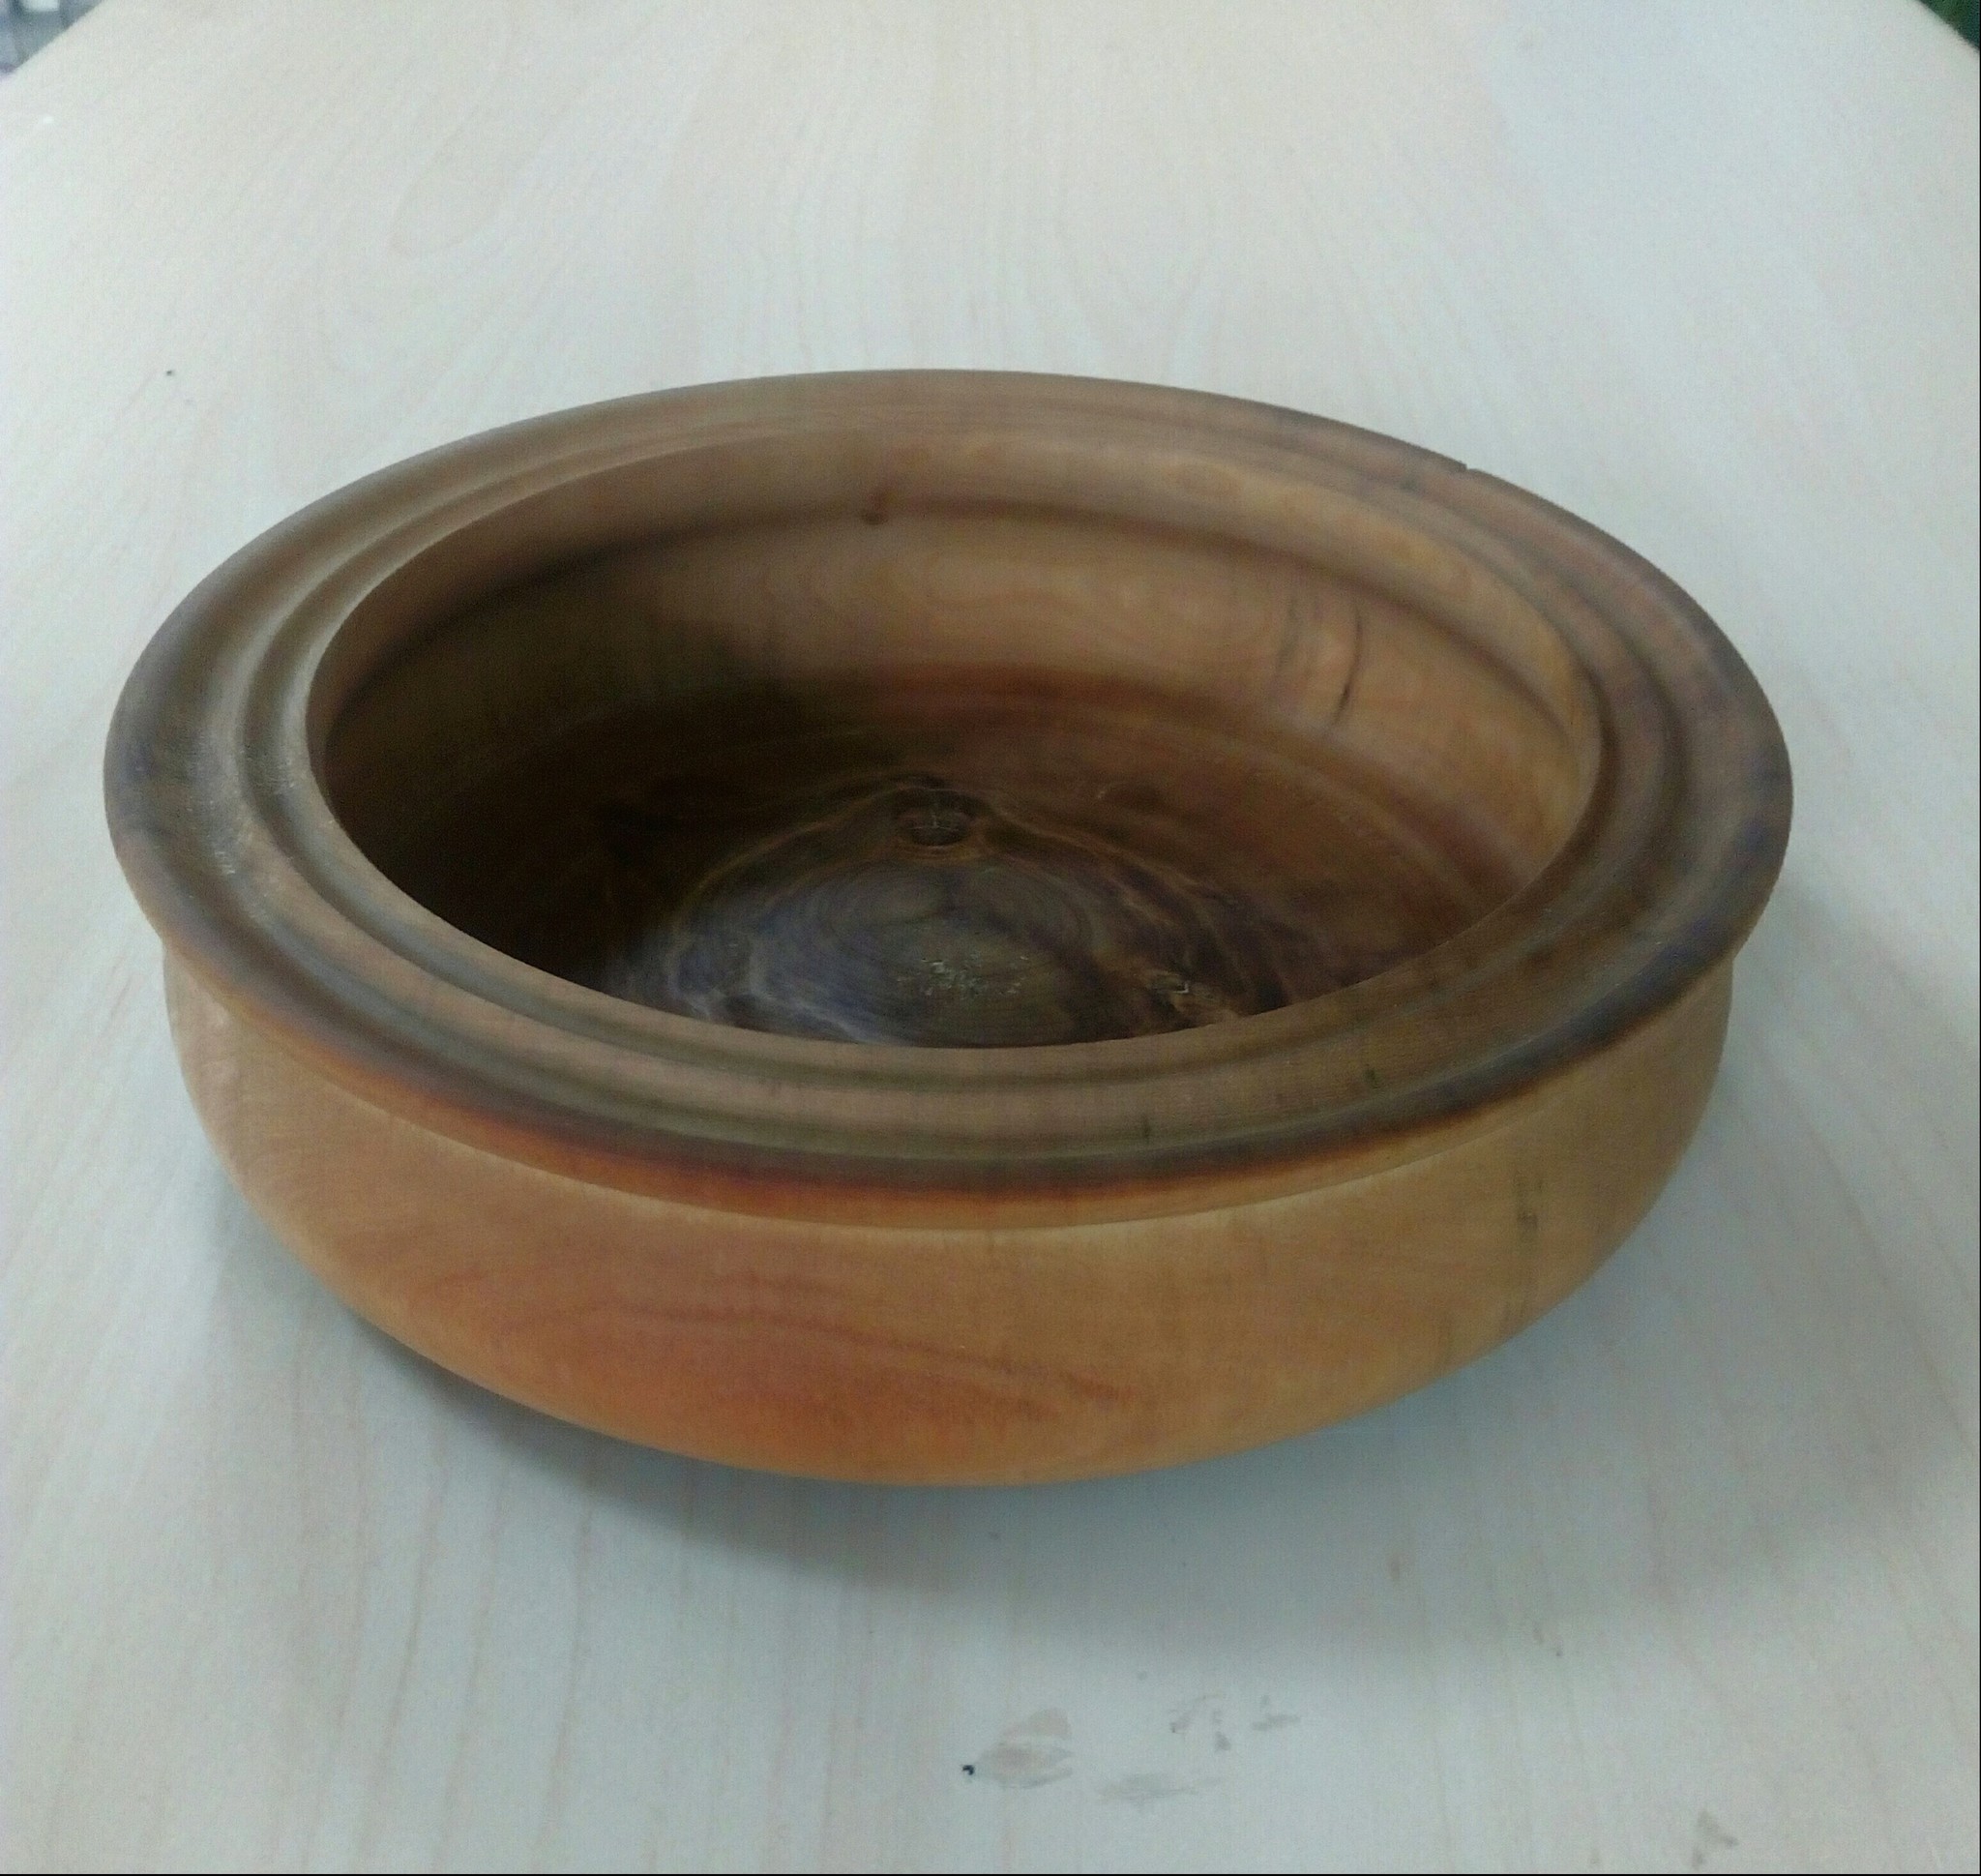 A bowl for all good things. - My, Turning machine, Needlework without process, Woodworking, Needlemen, Decor, Longpost